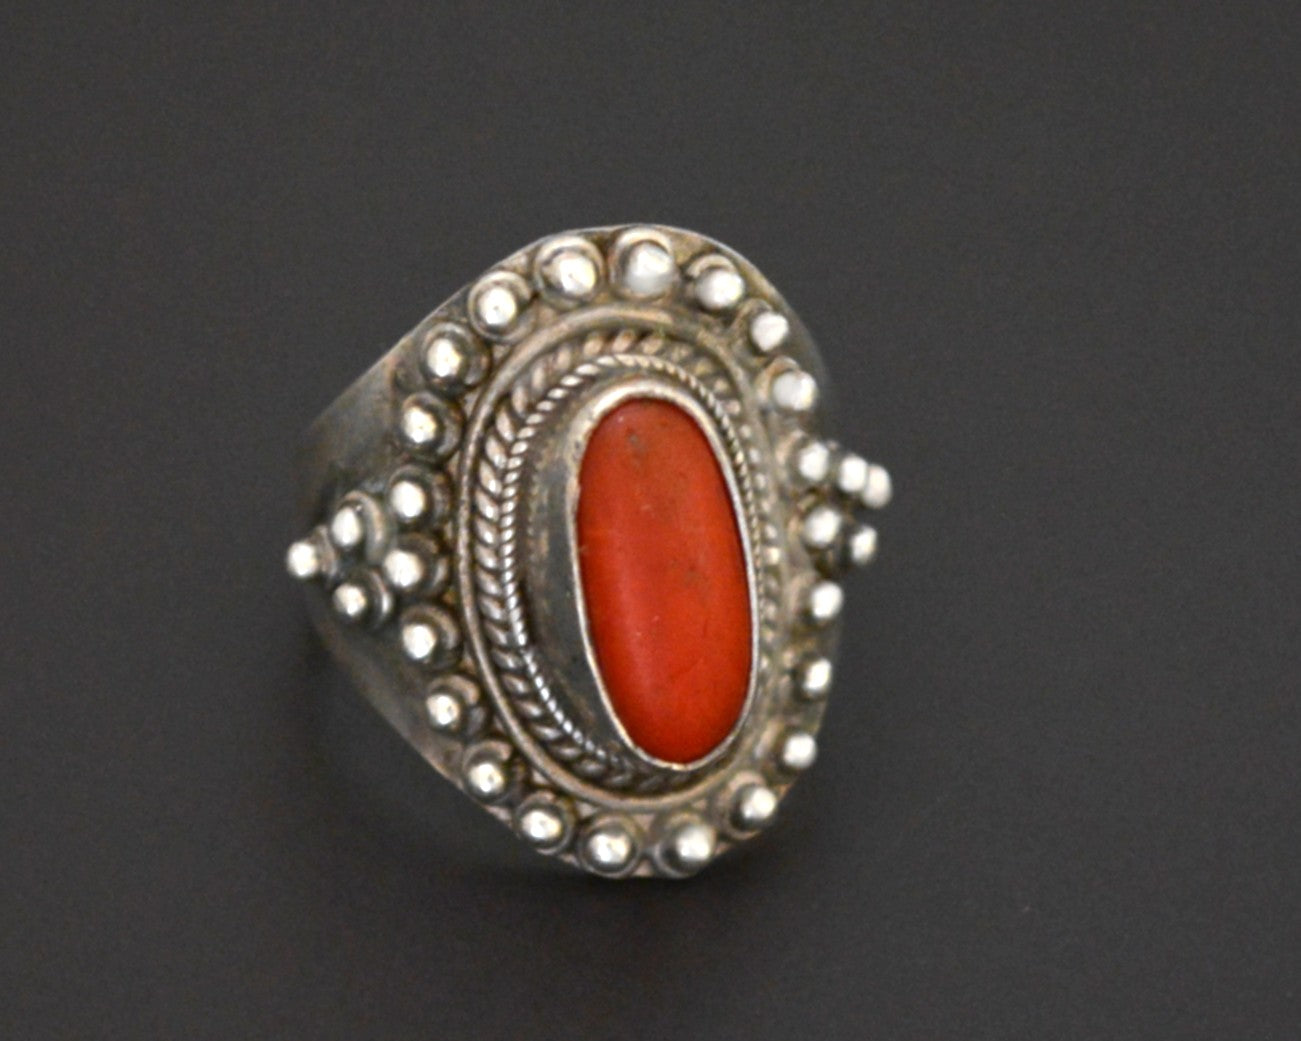 Vintage Nepali Coral Sterling Silver Ring - Size 7